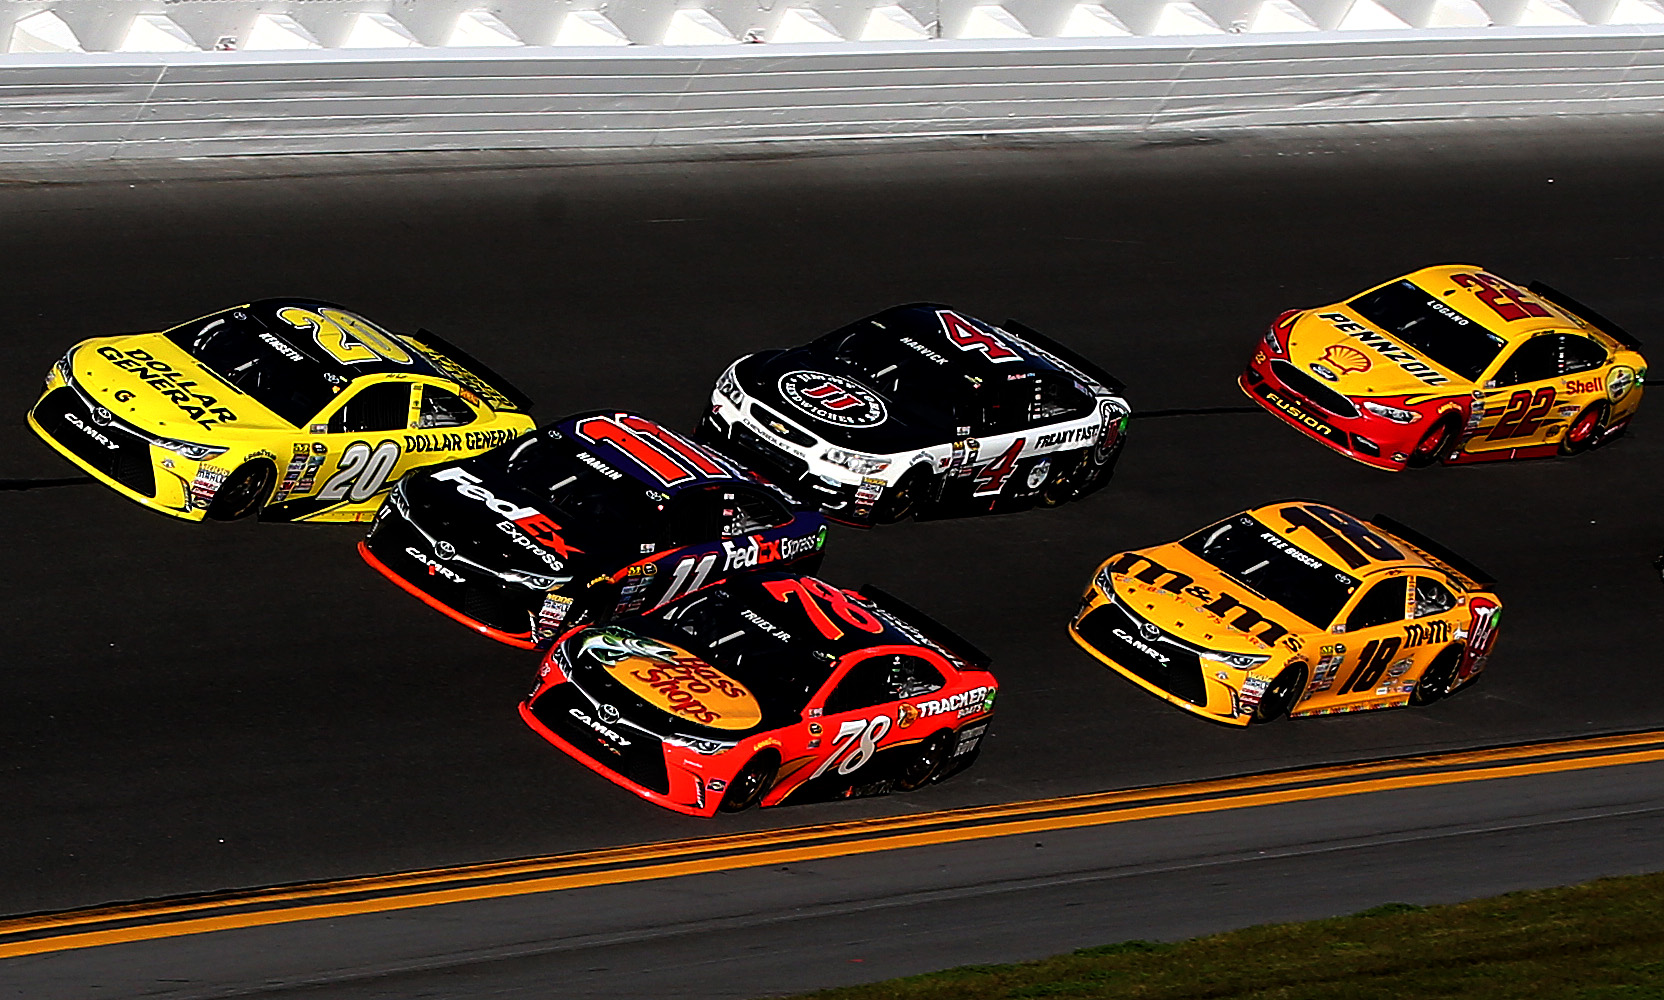 DAYTONA BEACH, FL - FEBRUARY 21: Matt Kenseth, driver of the #20 Dollar General Toyota, races Denny Hamlin, driver of the #11 FedEx Express Toyota, and Martin Truex Jr., driver of the #78 Bass Pro Shops/Tracker Boats Toyota, ahead of the field during the NASCAR Sprint Cup Series DAYTONA 500 at Daytona International Speedway on February 21, 2016 in Daytona Beach, Florida. (Photo by Sean Gardner/Getty Images) | Getty Images